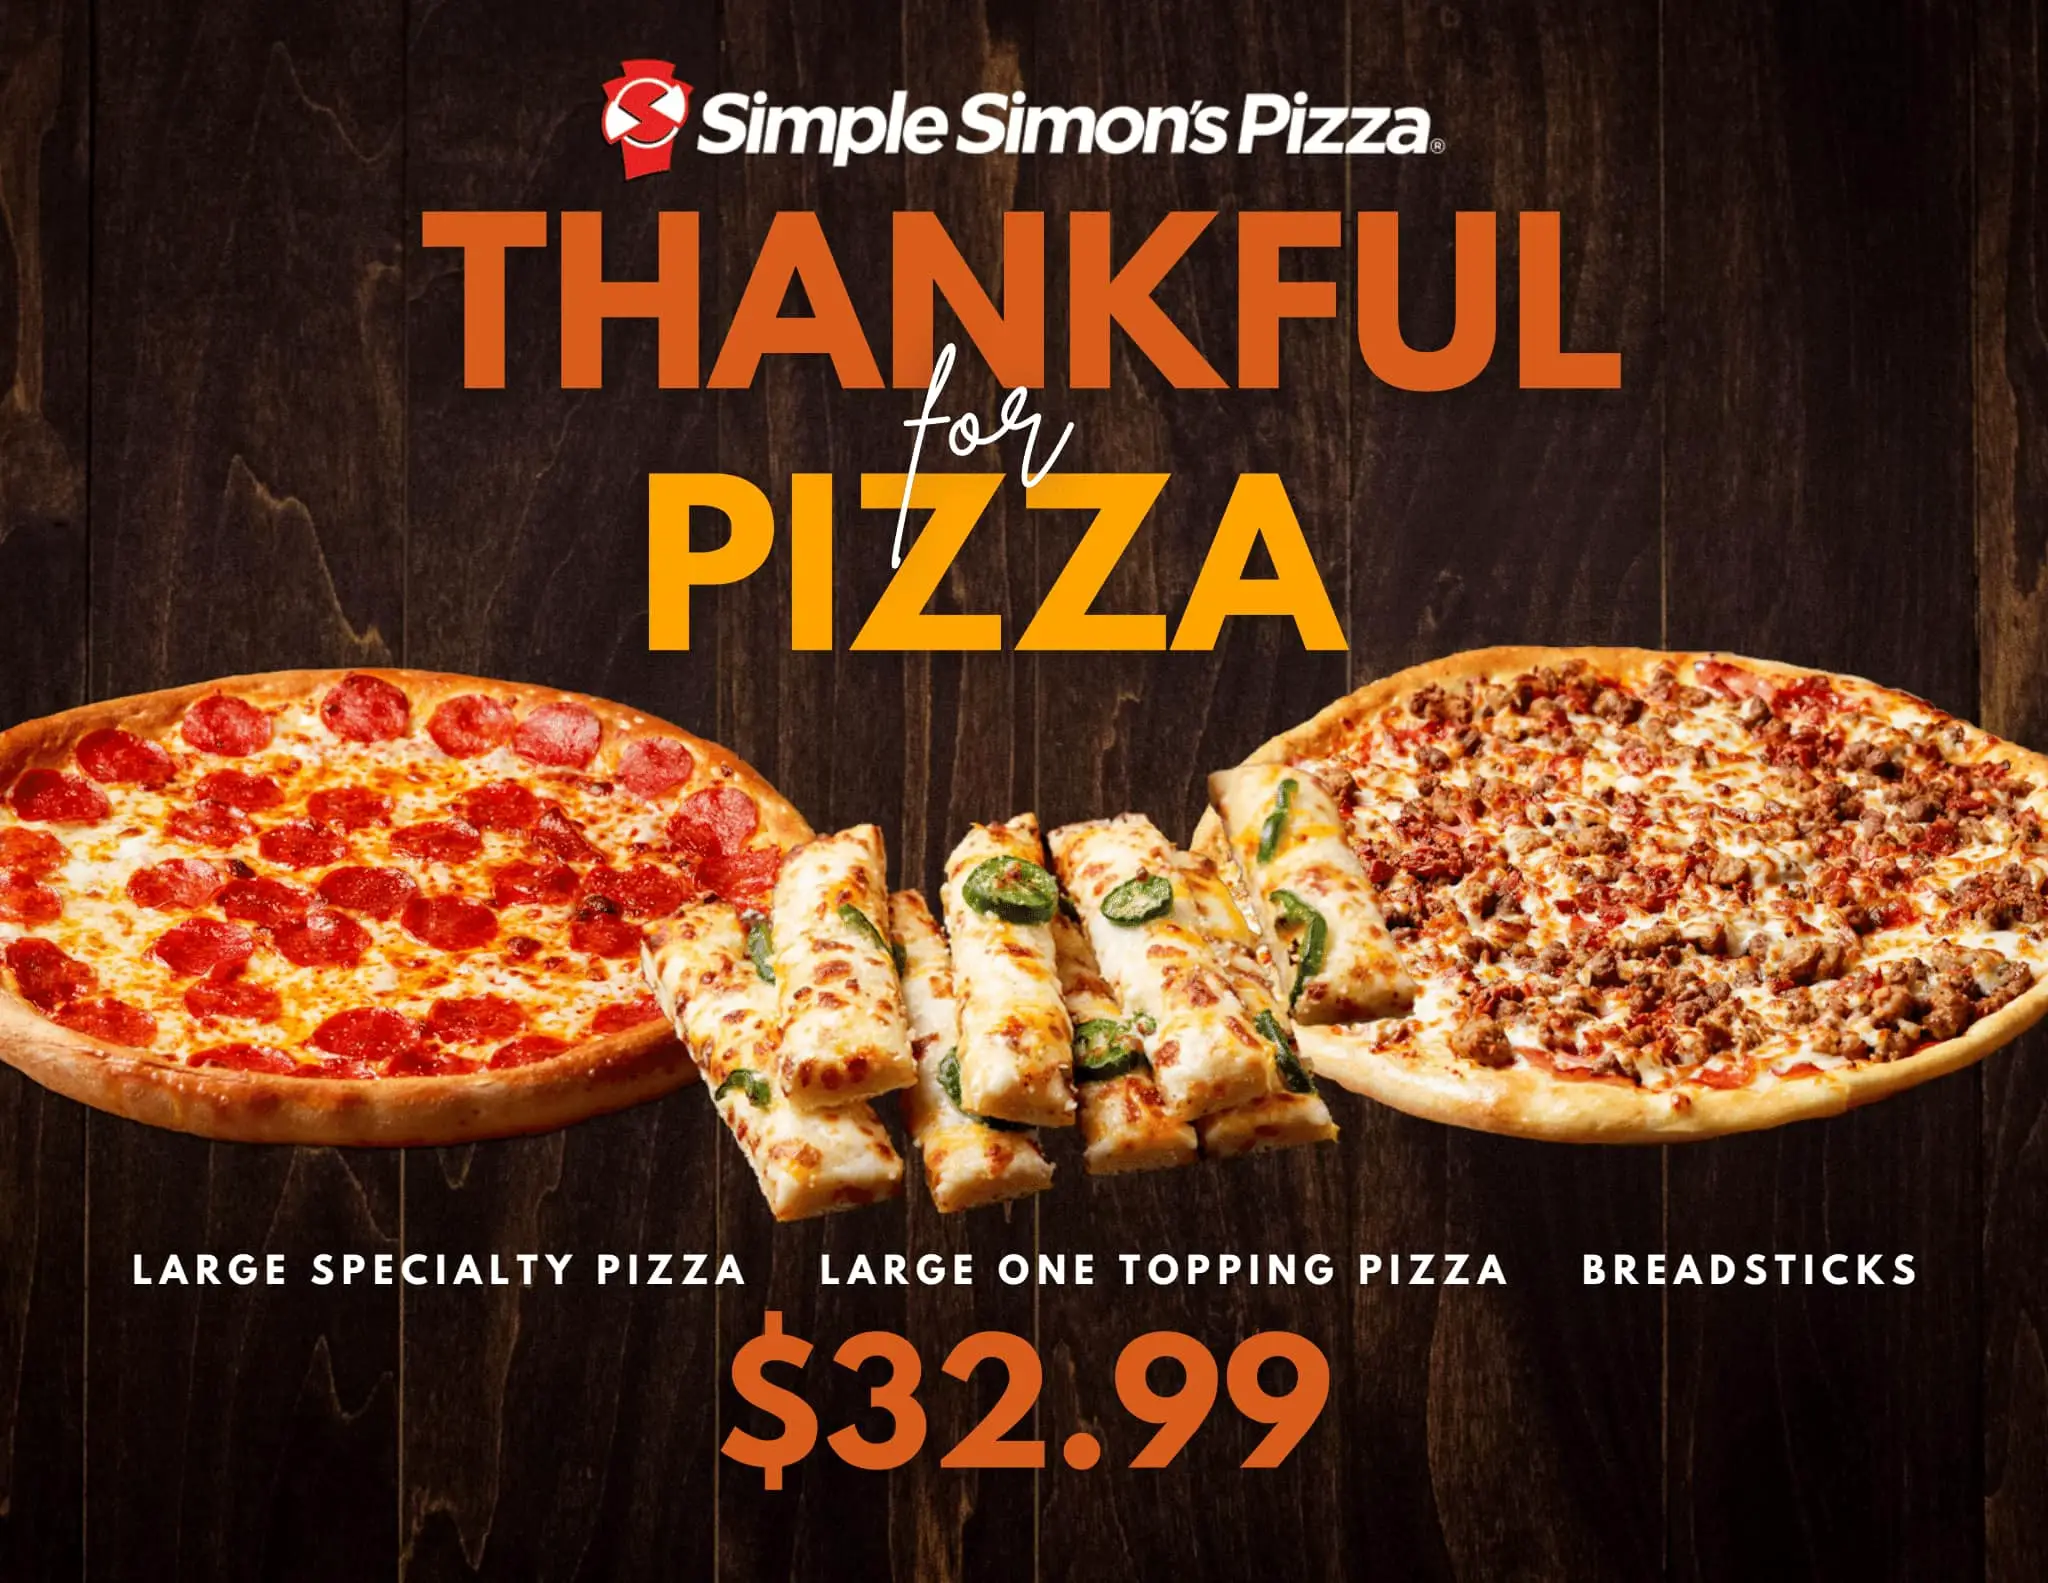 Simple Simon's Pizza Black Friday Get a Large Specialty Pizza, Large 1 Topping Pizza and Breadsticks for $32.99